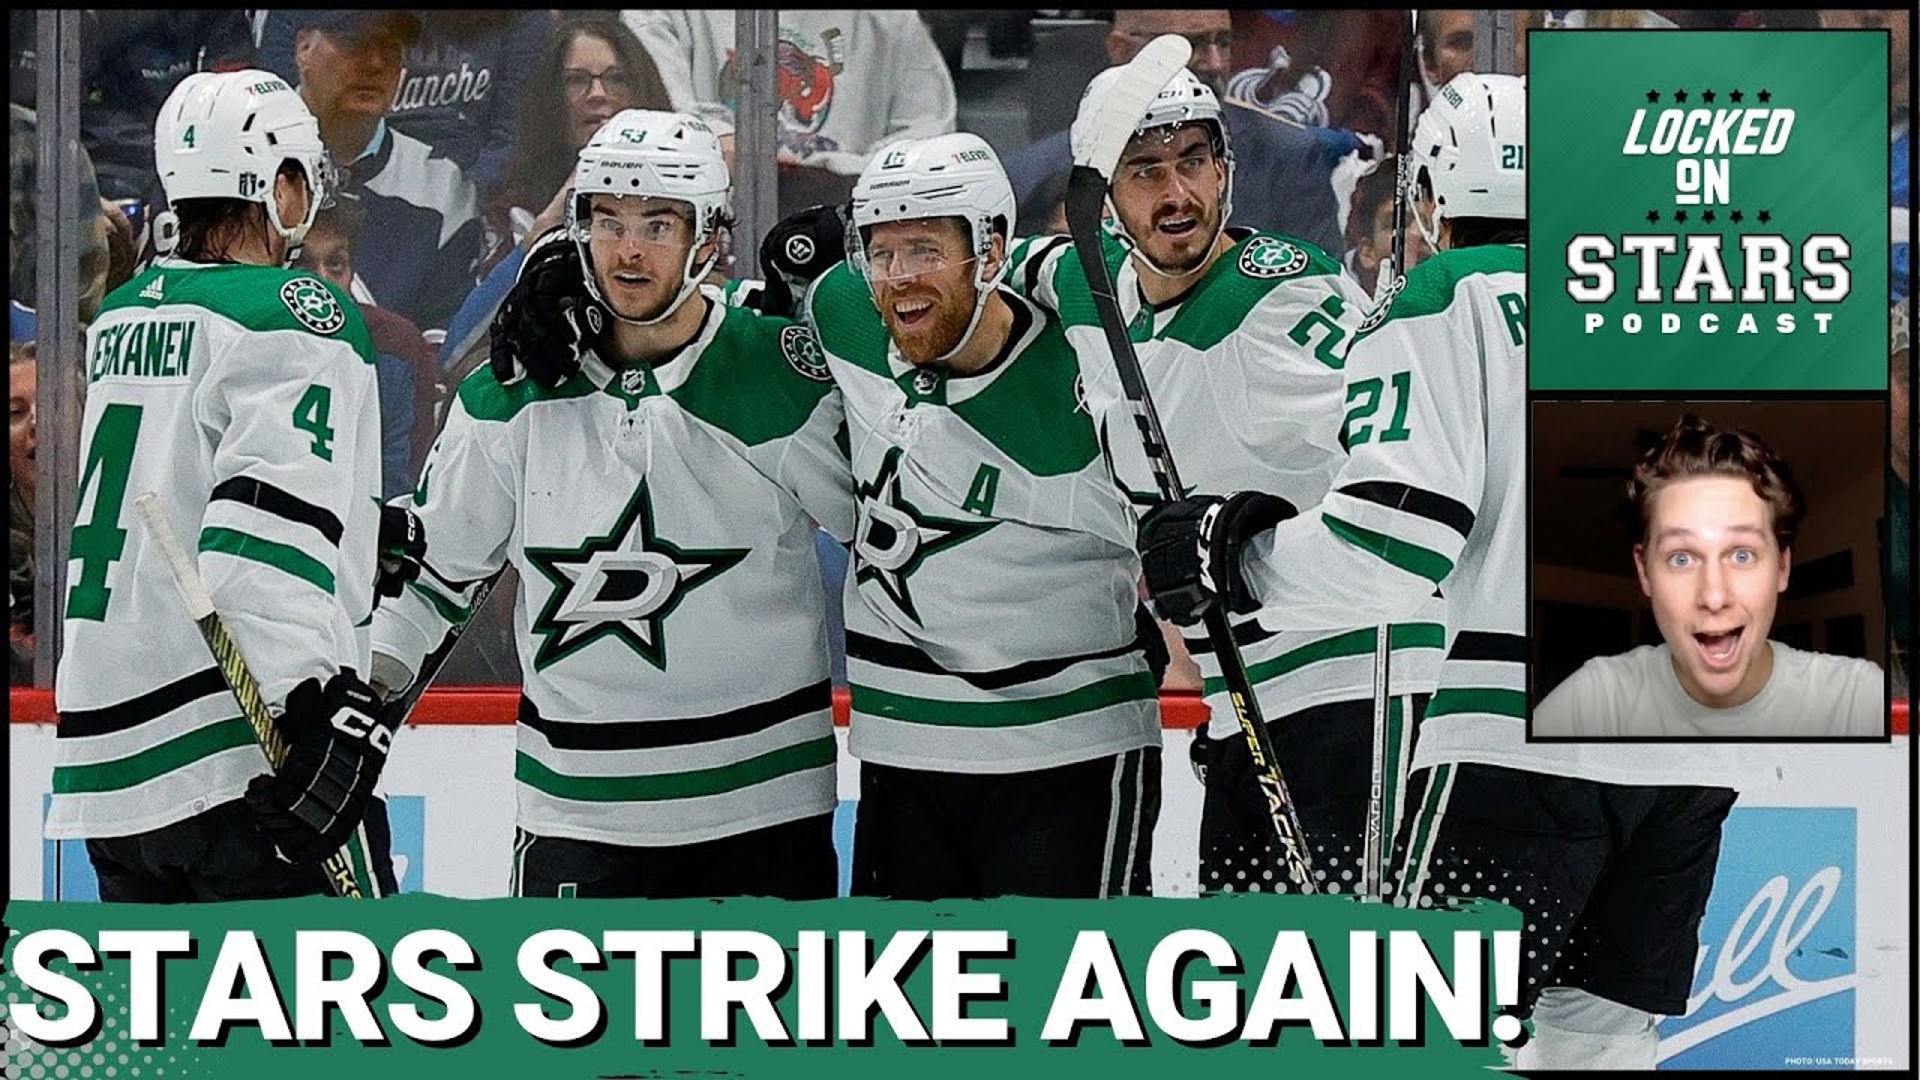 The Dallas Stars win game four 5-1 over the Colorado Avalanche and take a commanding 3-1 series lead.